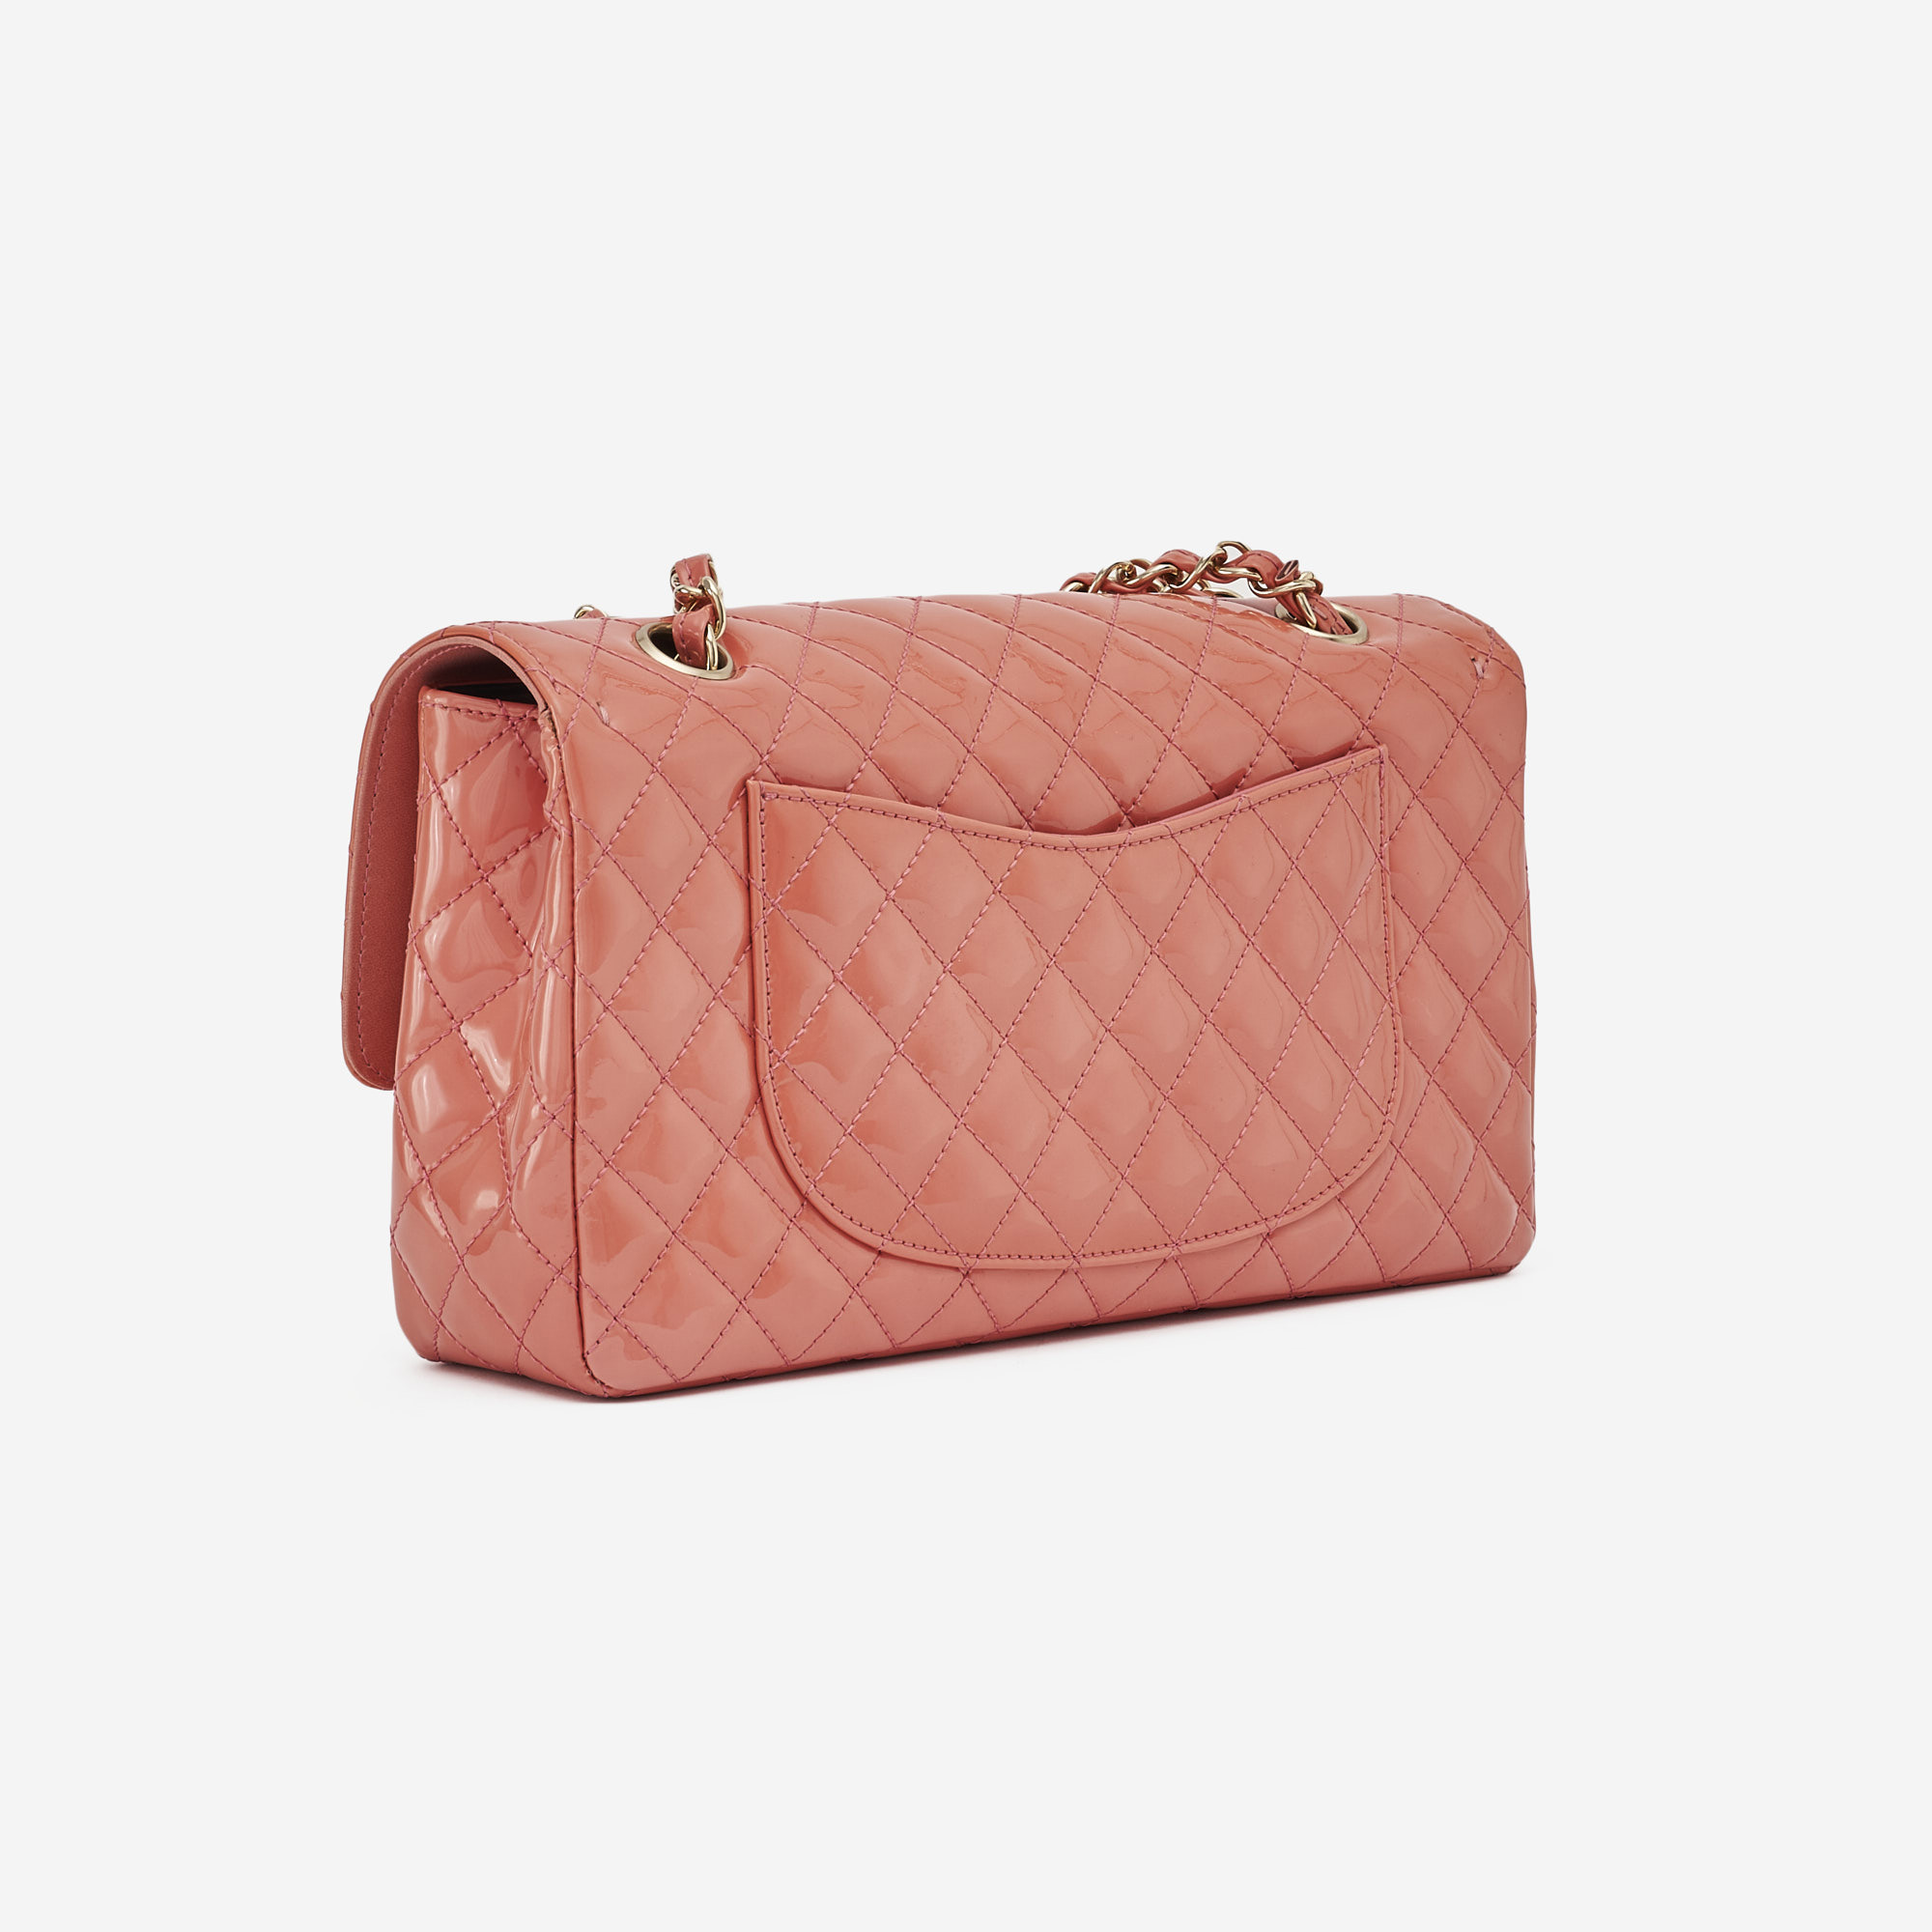 Chanel Timeless Medium Patent Coral Limited Edition SACLÀB